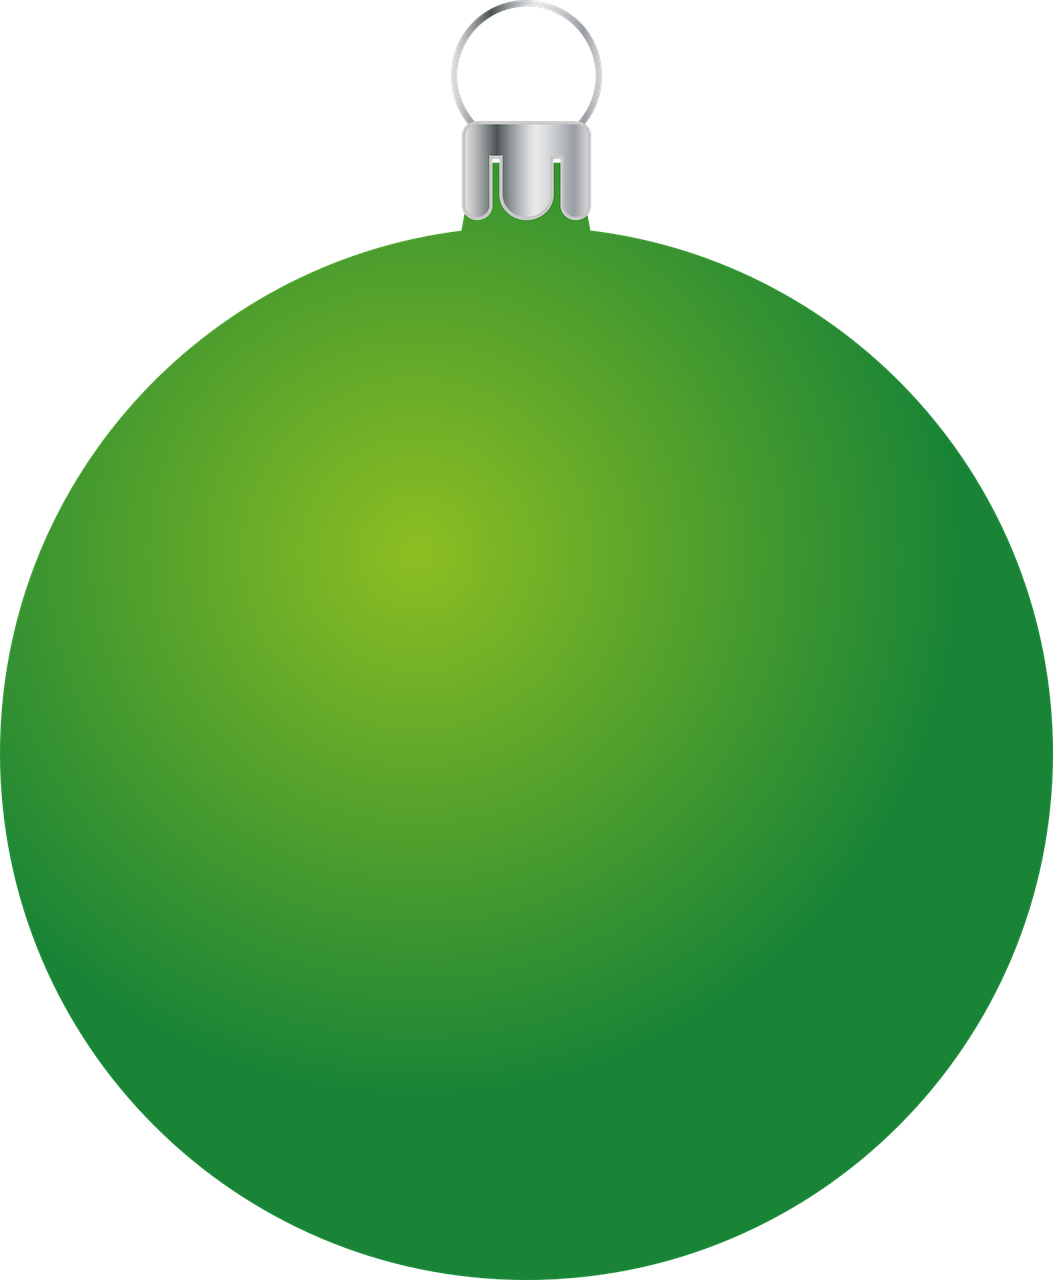 Green Pasko Bauble PNG Clipart